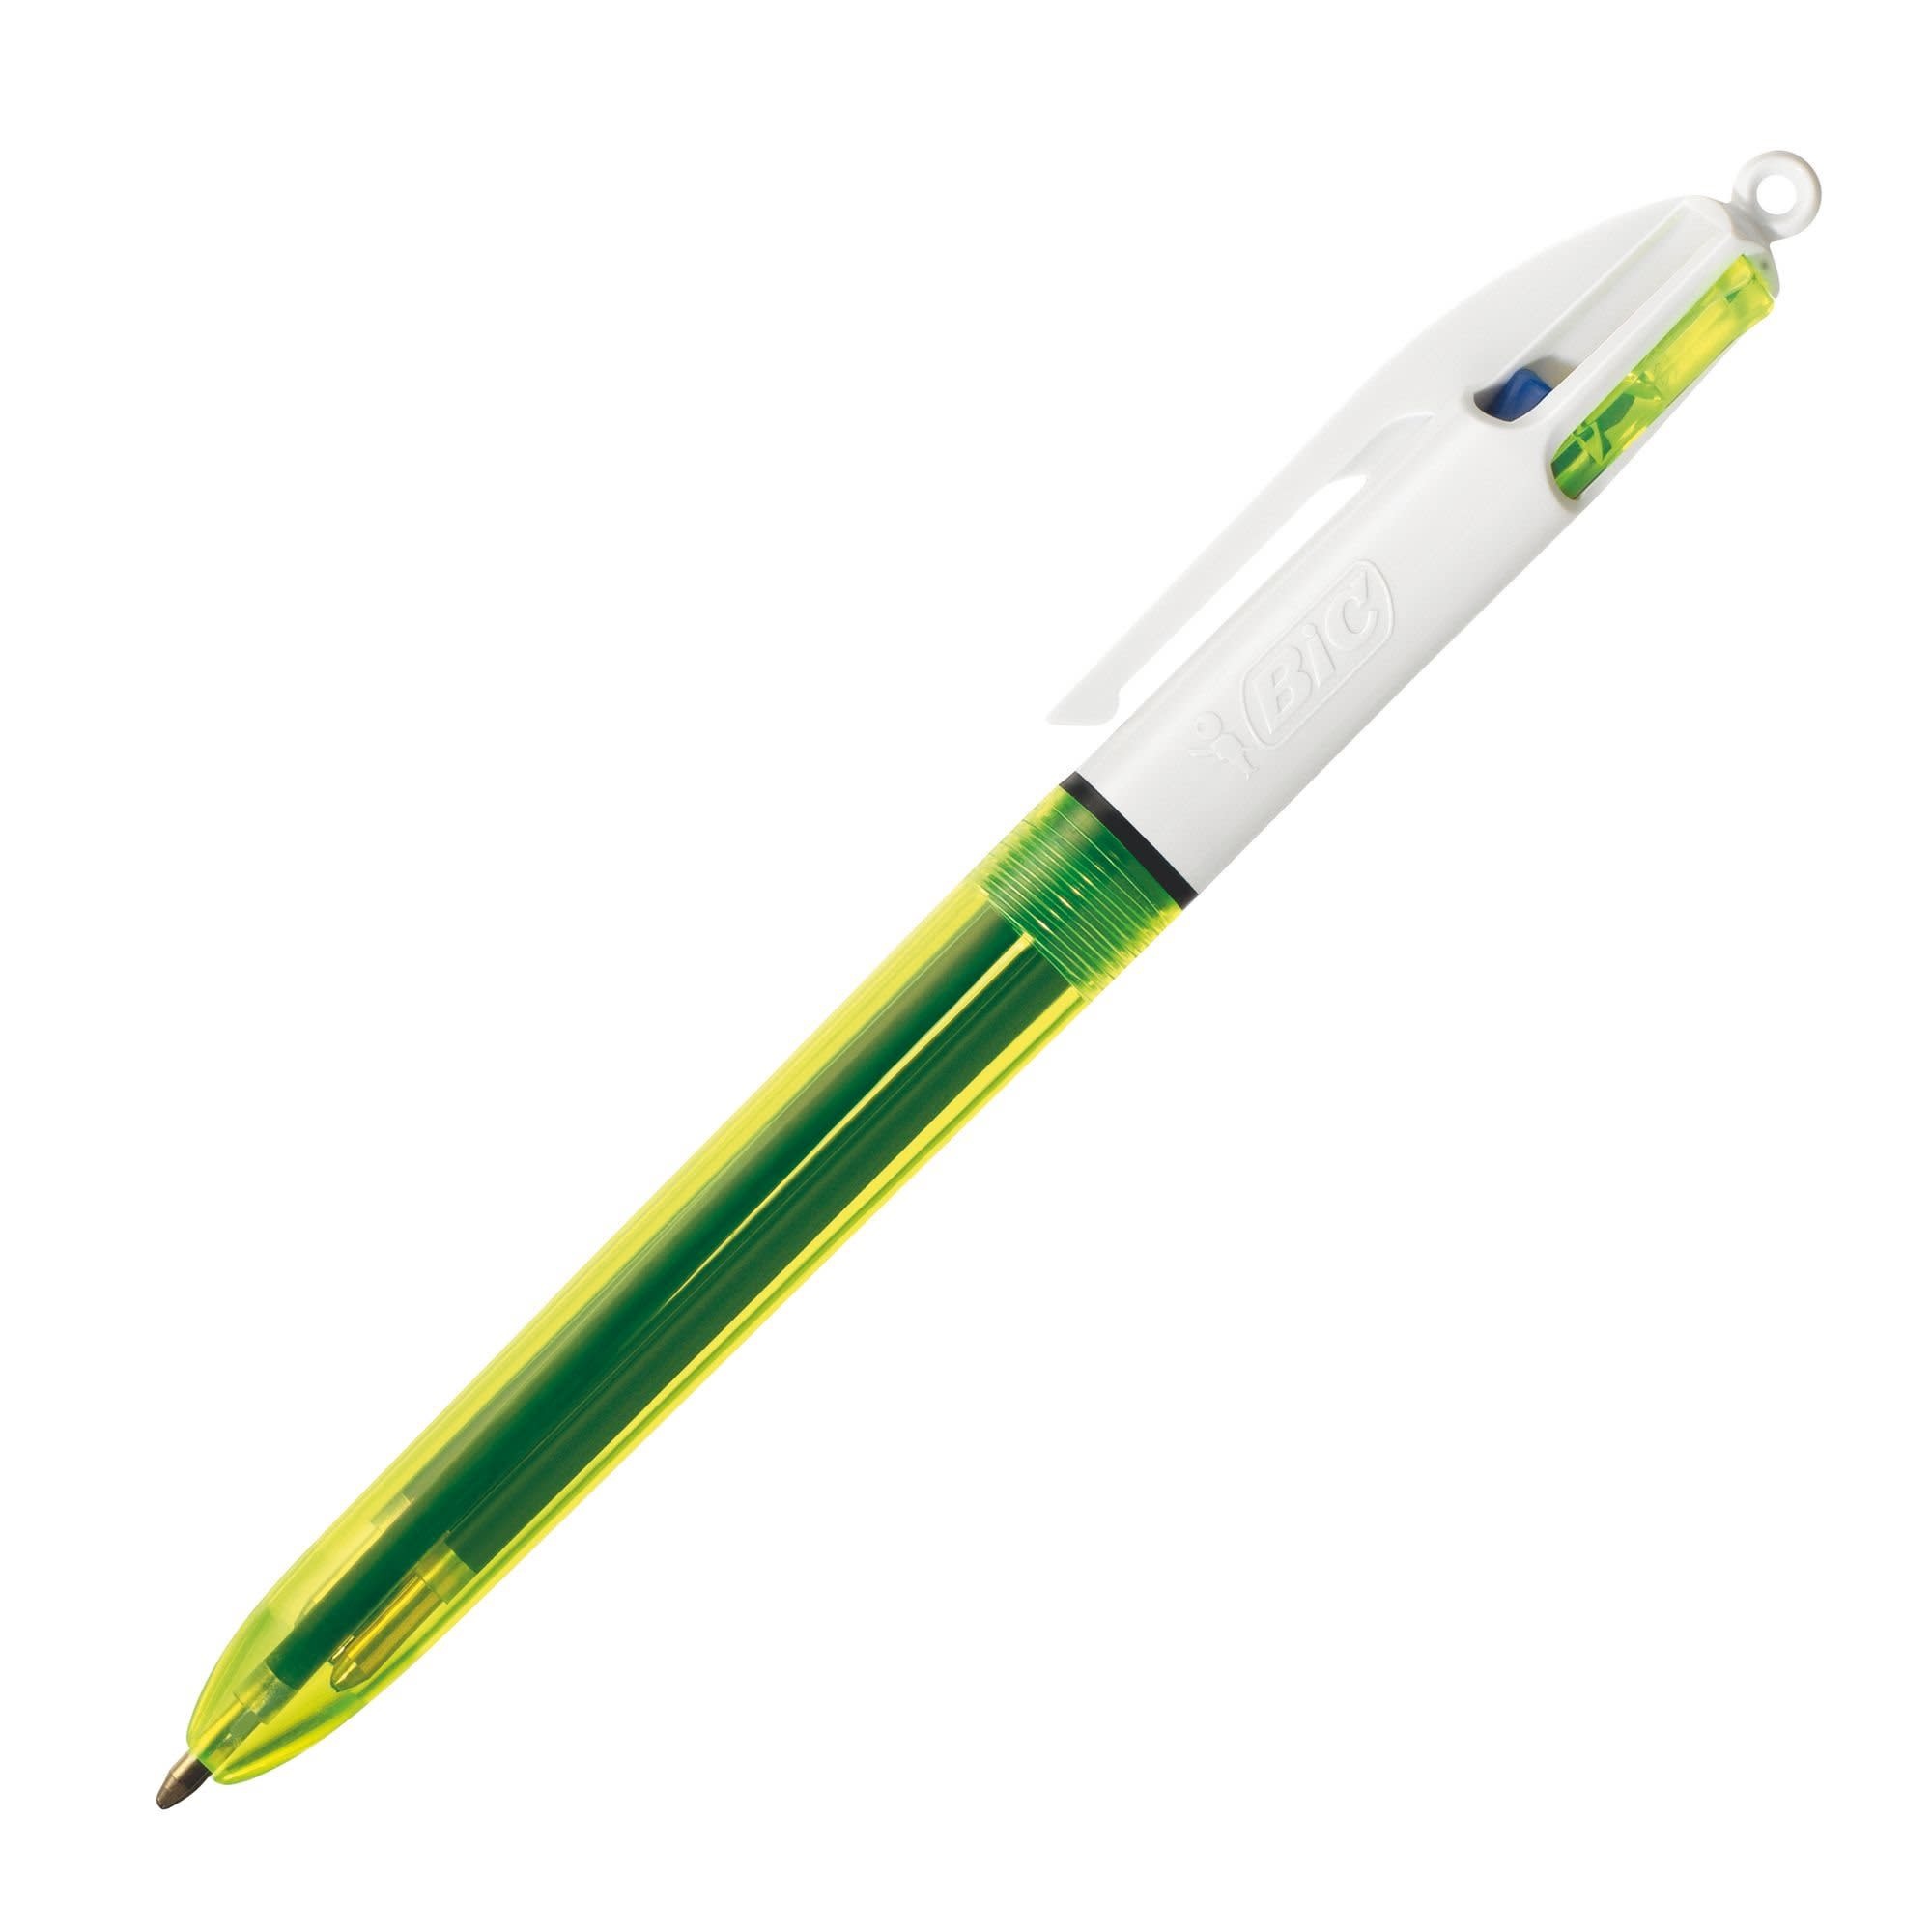 BIC 4 COULEURS FLUO Pointe Moyenne - Encres N/B/R & Pointe large 1,6 mm  Jaune Fluo - Papeterie Michel